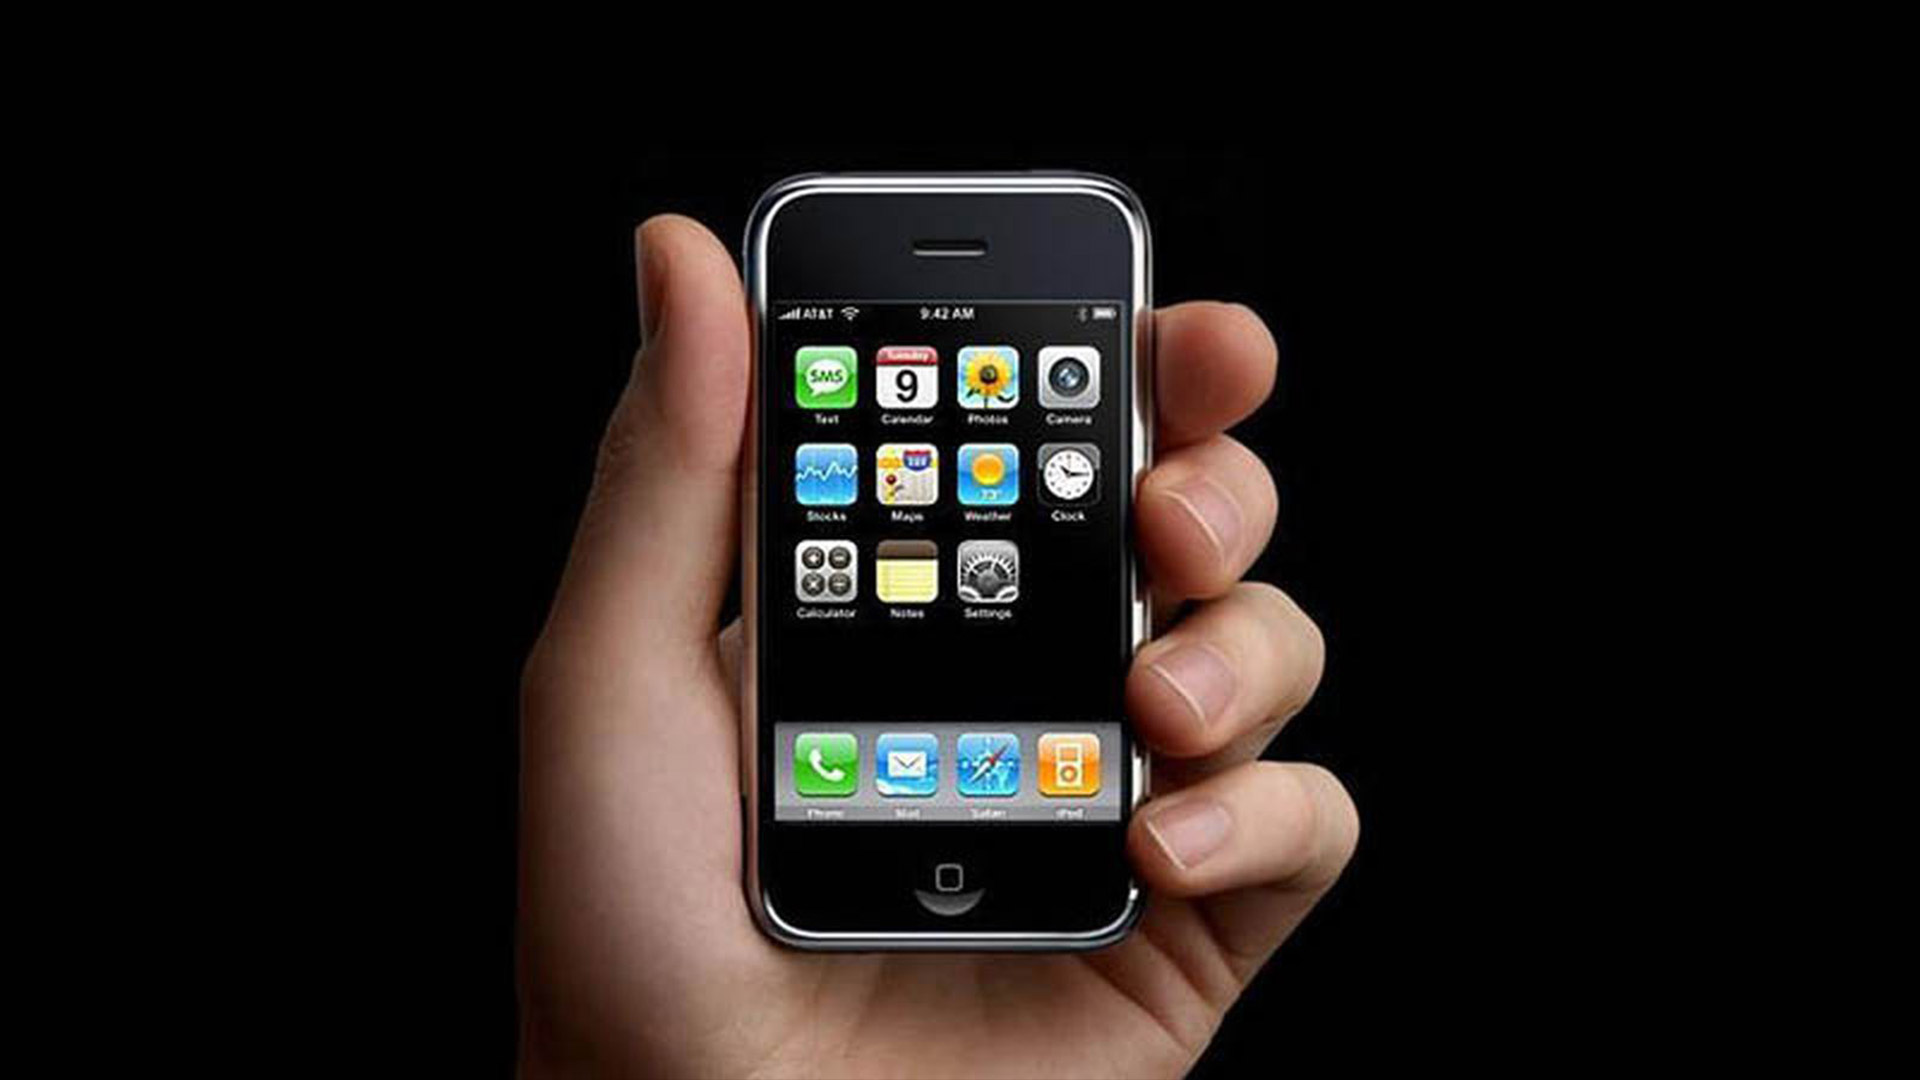 The first iPhone was released in 2007 and changed the internet landscape again by expanding its availability and usage.